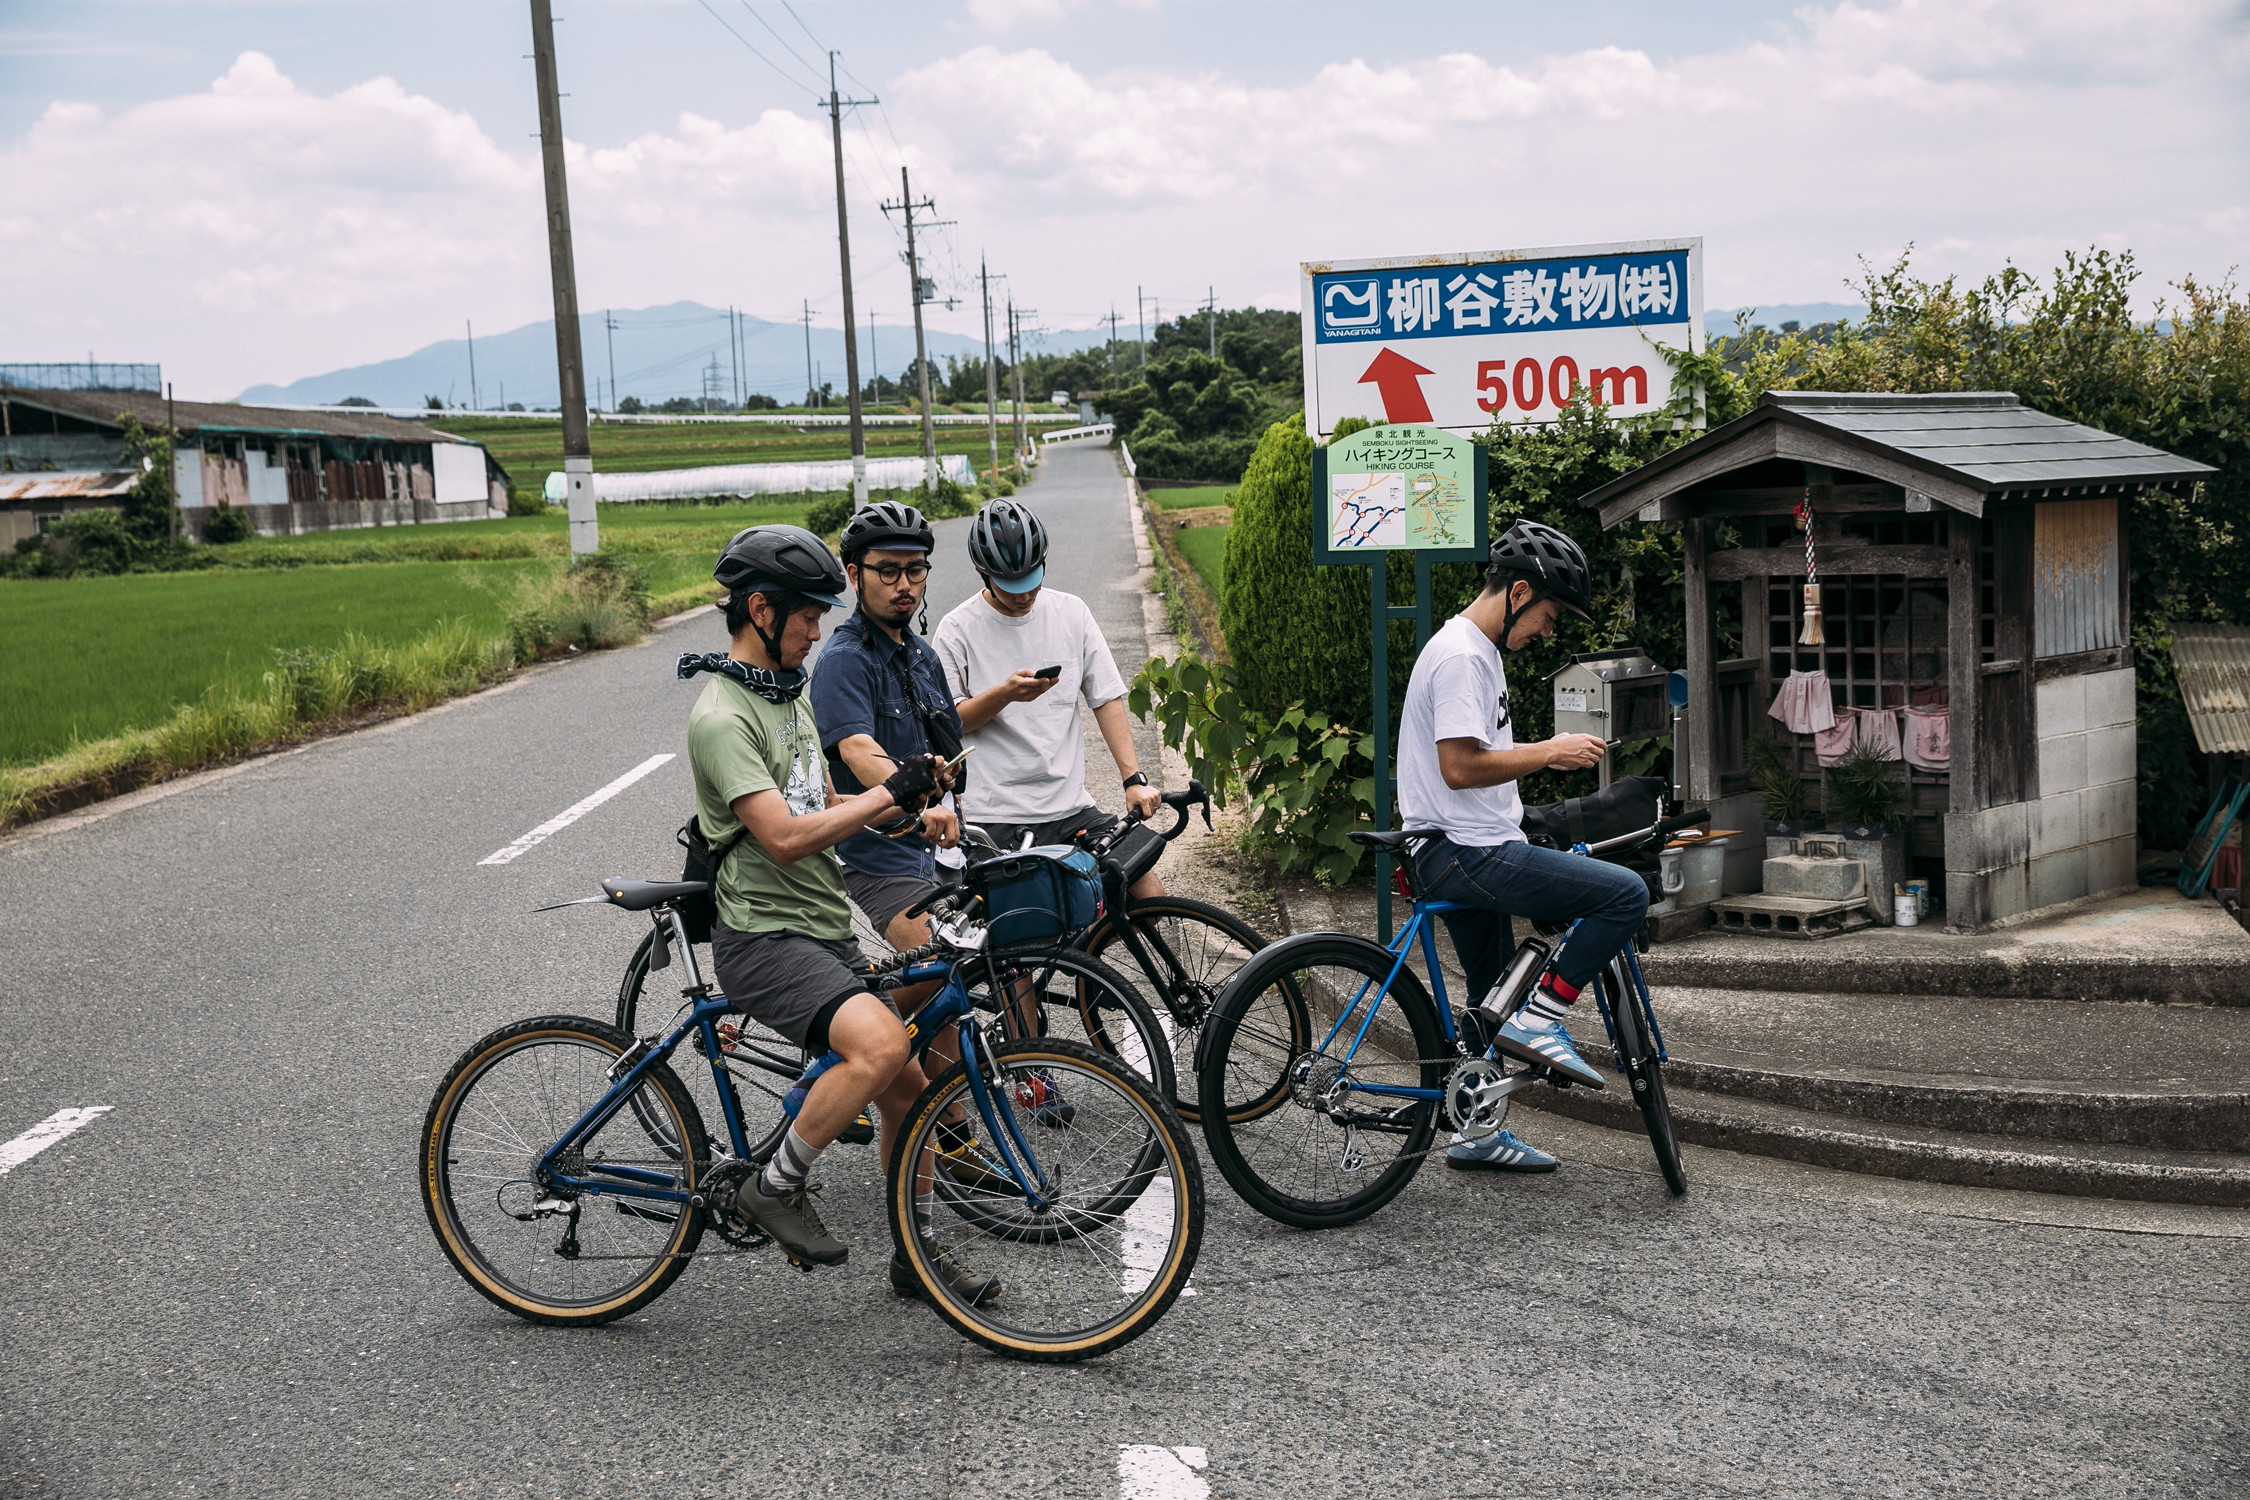 riding gravel bikes in Japan with Shimano GRX limited